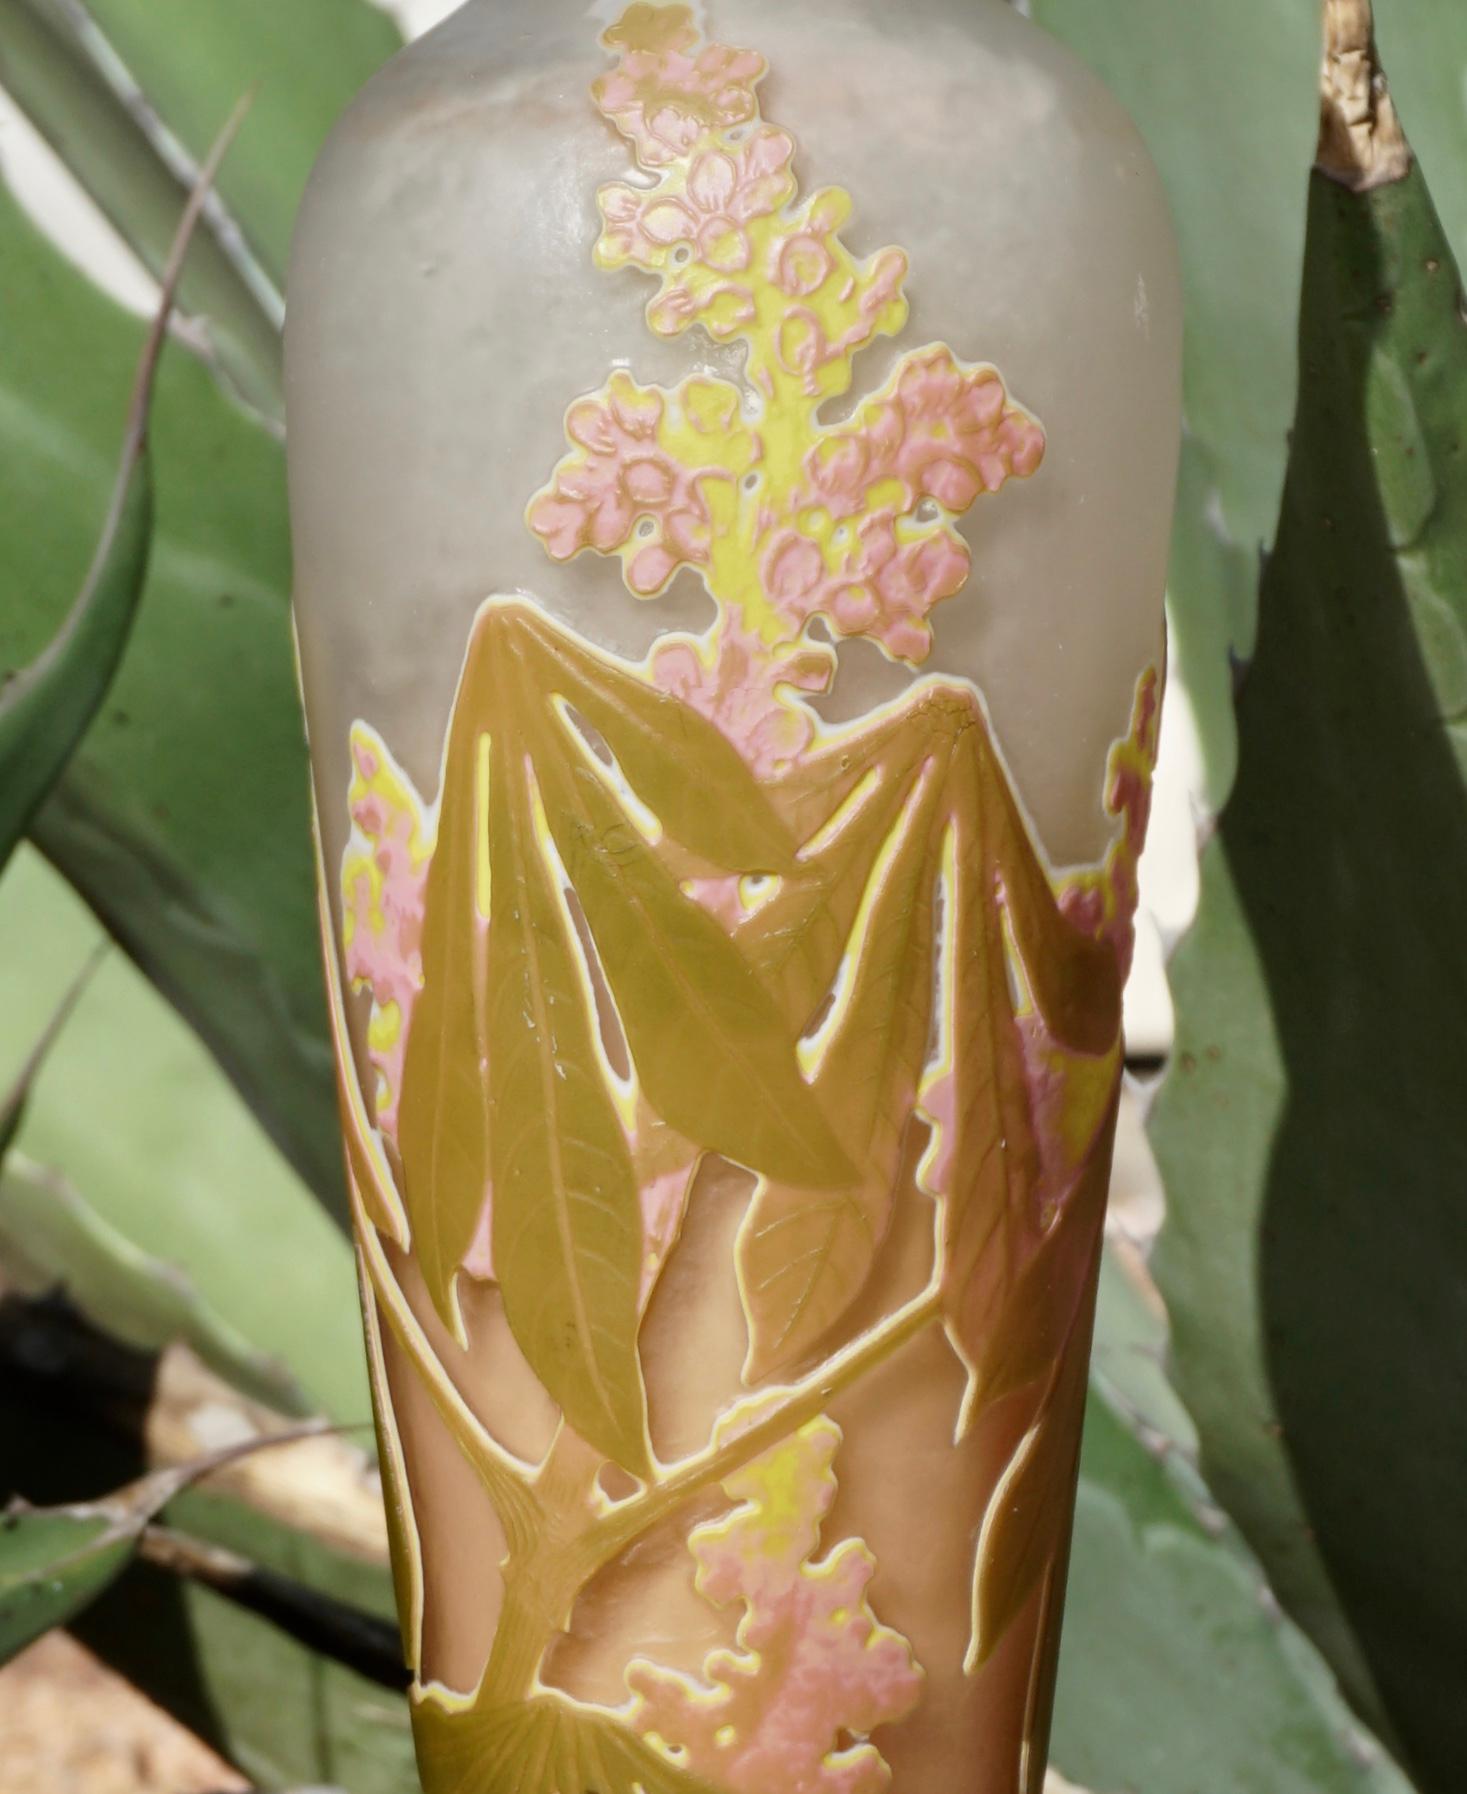 Fired Emile Galle Tall Cameo Art Nouveau Vase 1904 For Sale